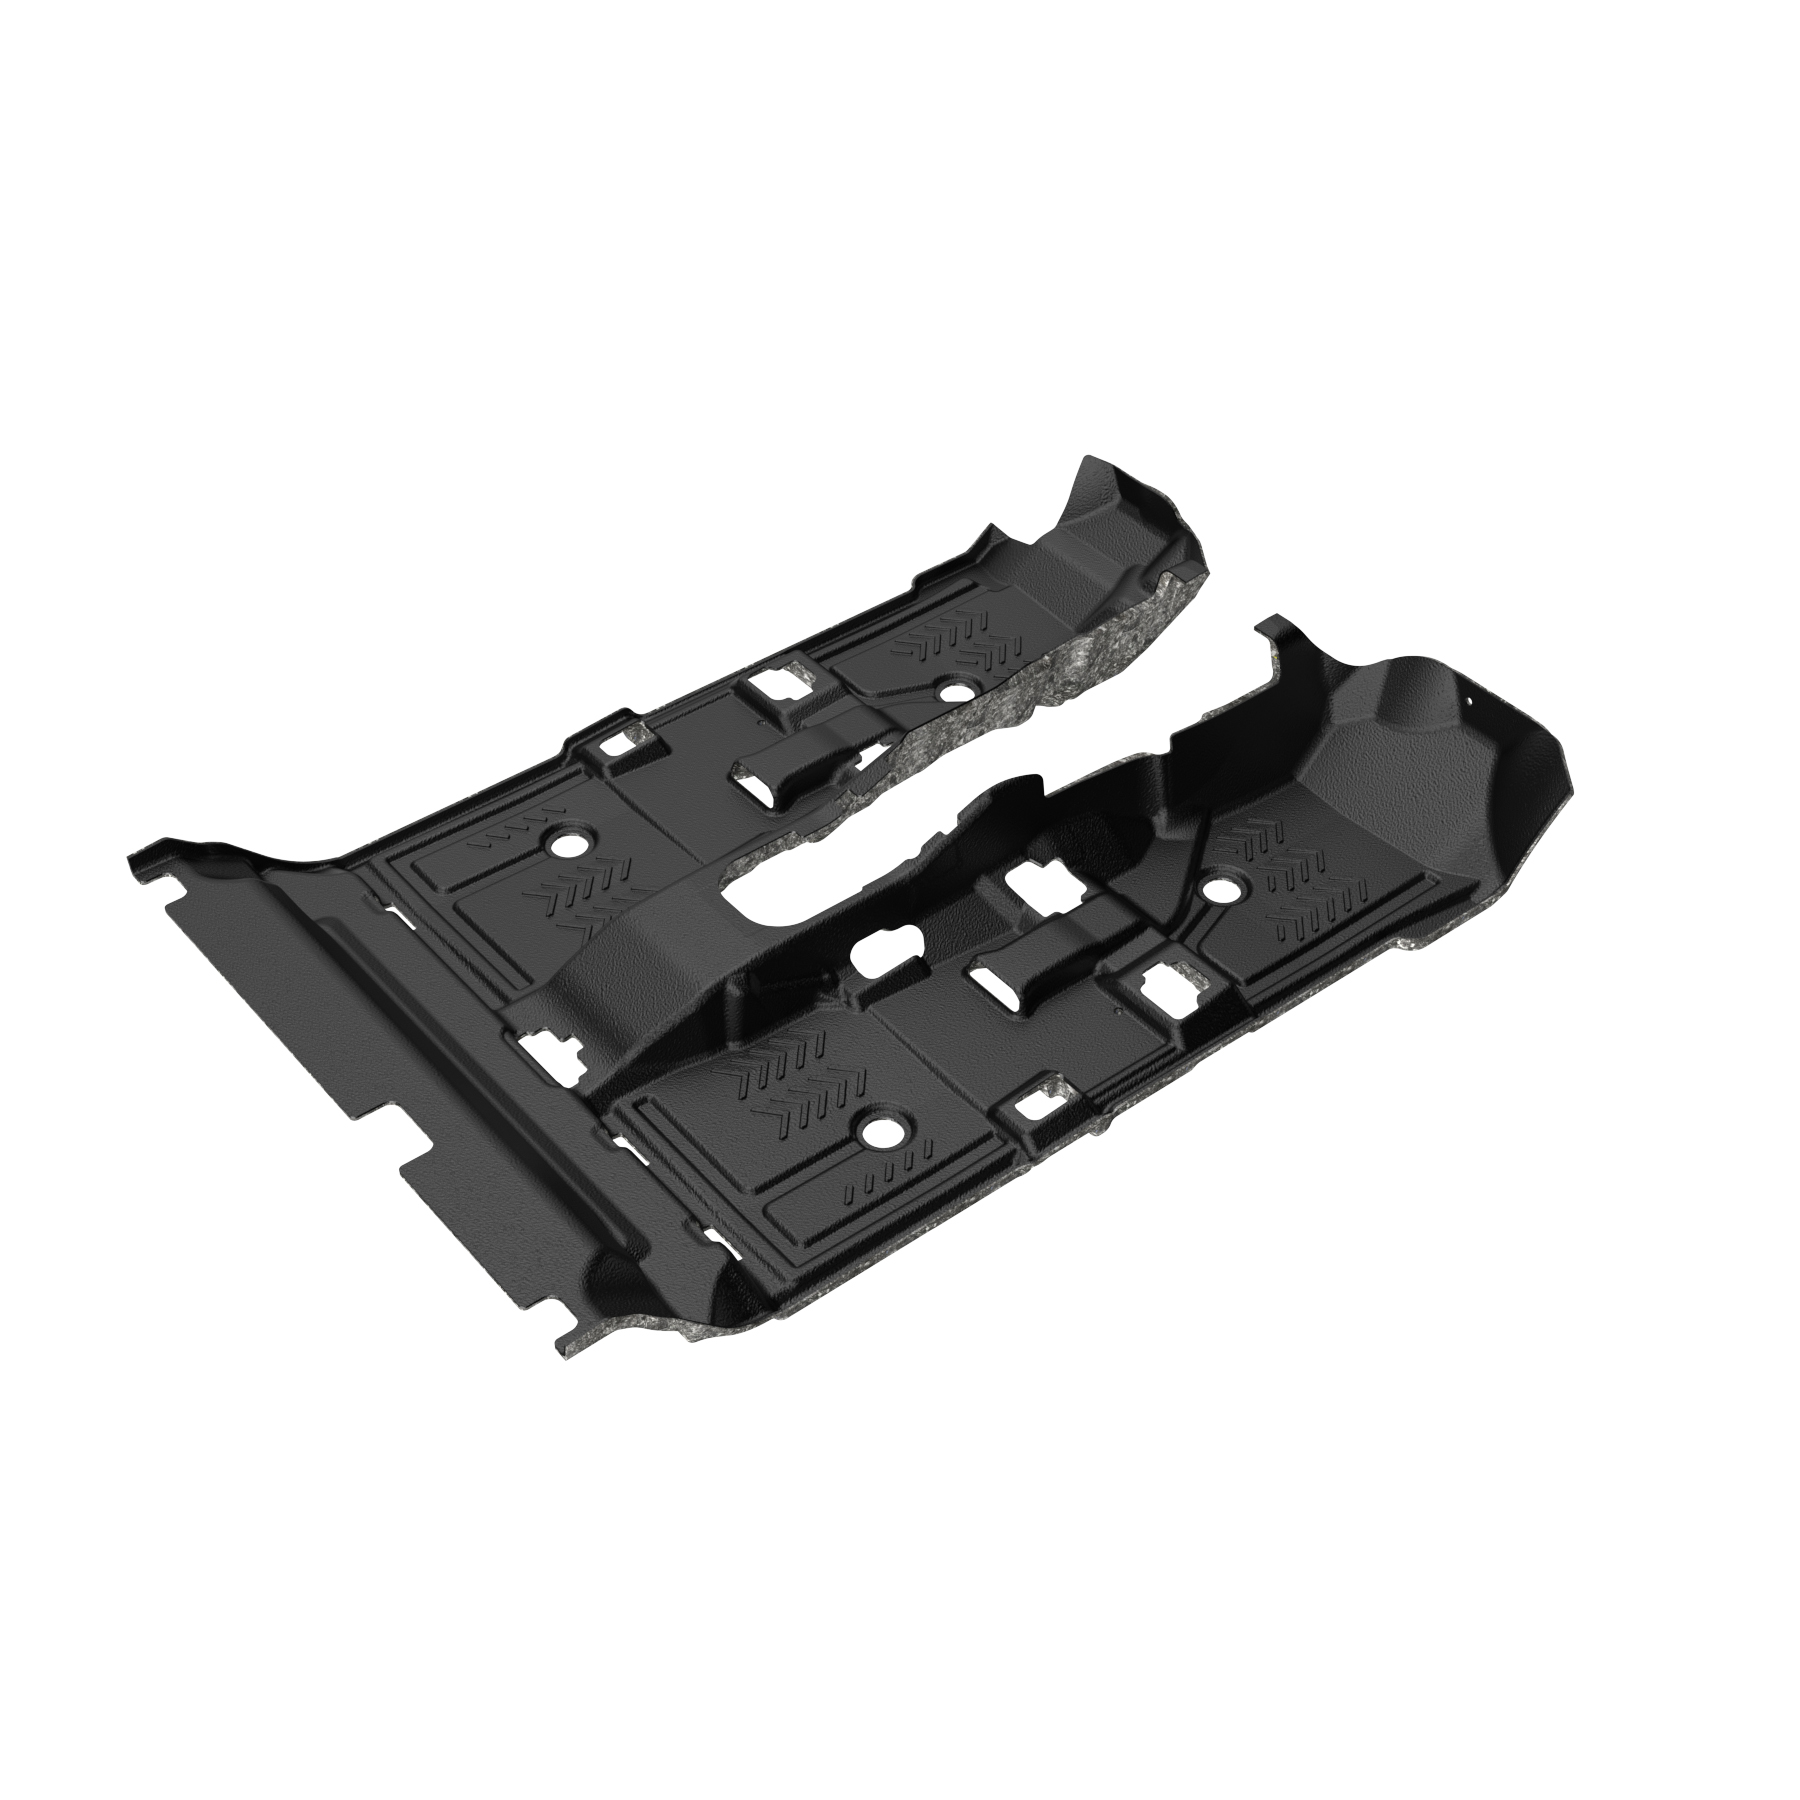 Ford Bronco Coming soon: Armorlite replacement flooring for 2dr and 4dr Bronco bronco 4dr black